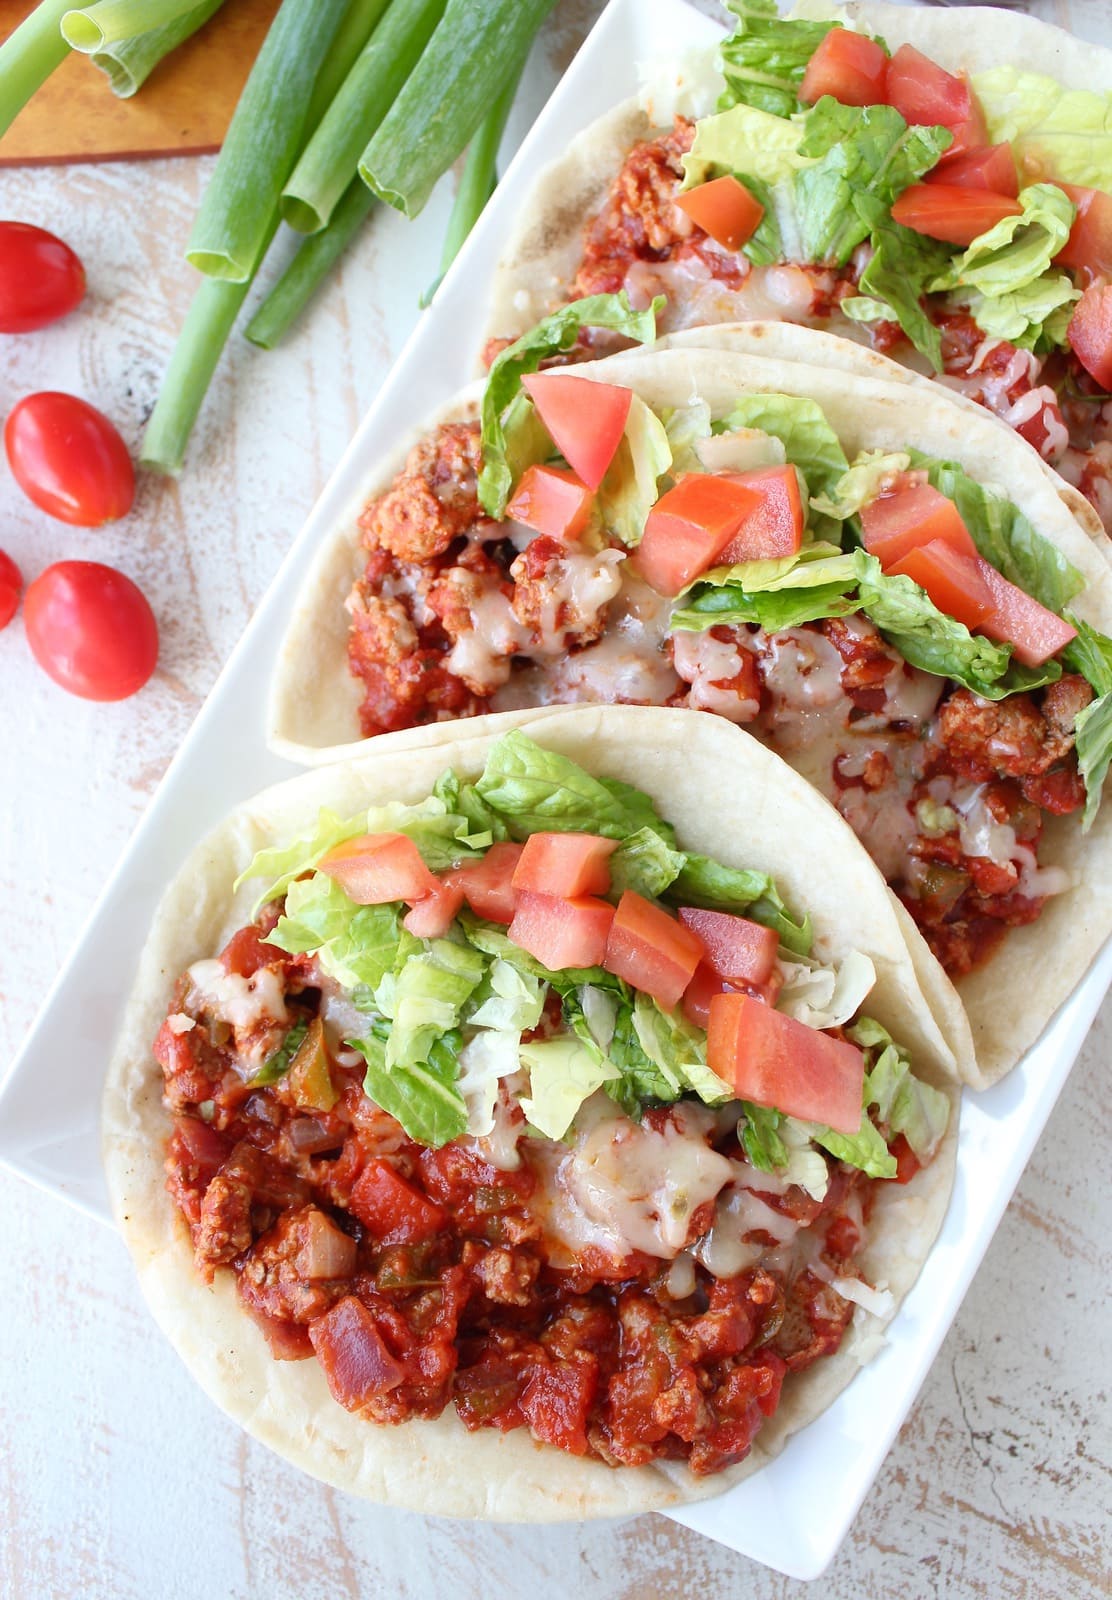 Three tacos filled with ground turkey, salsa, cheese, lettuce, and tomato.